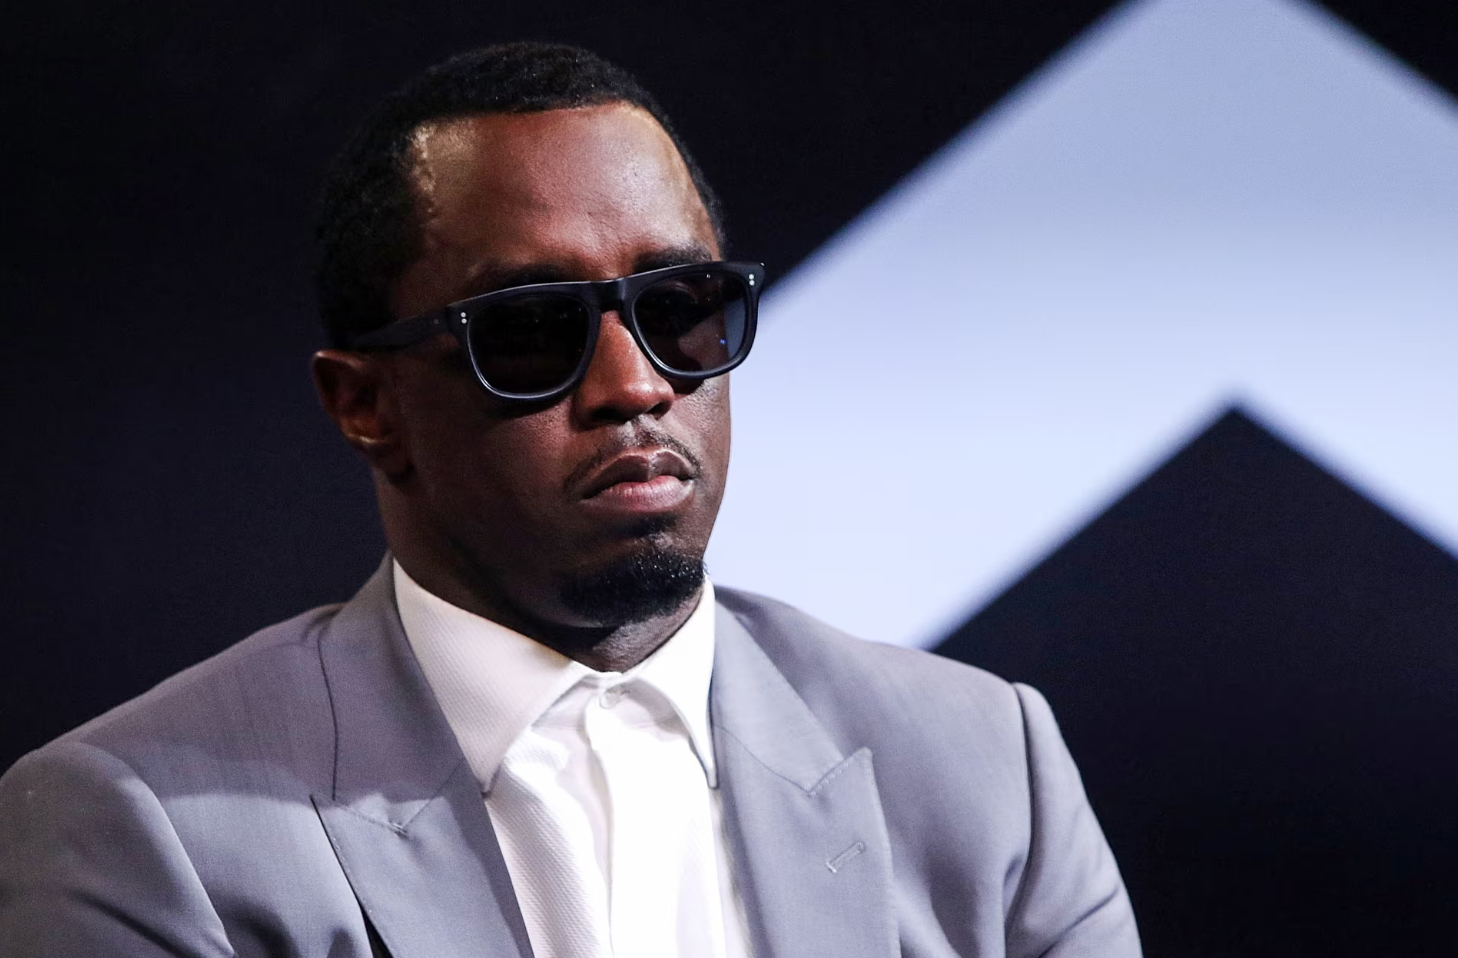 He was a hip-hop legend. Now, abuse allegations engulf Sean ‘Diddy’ Combs